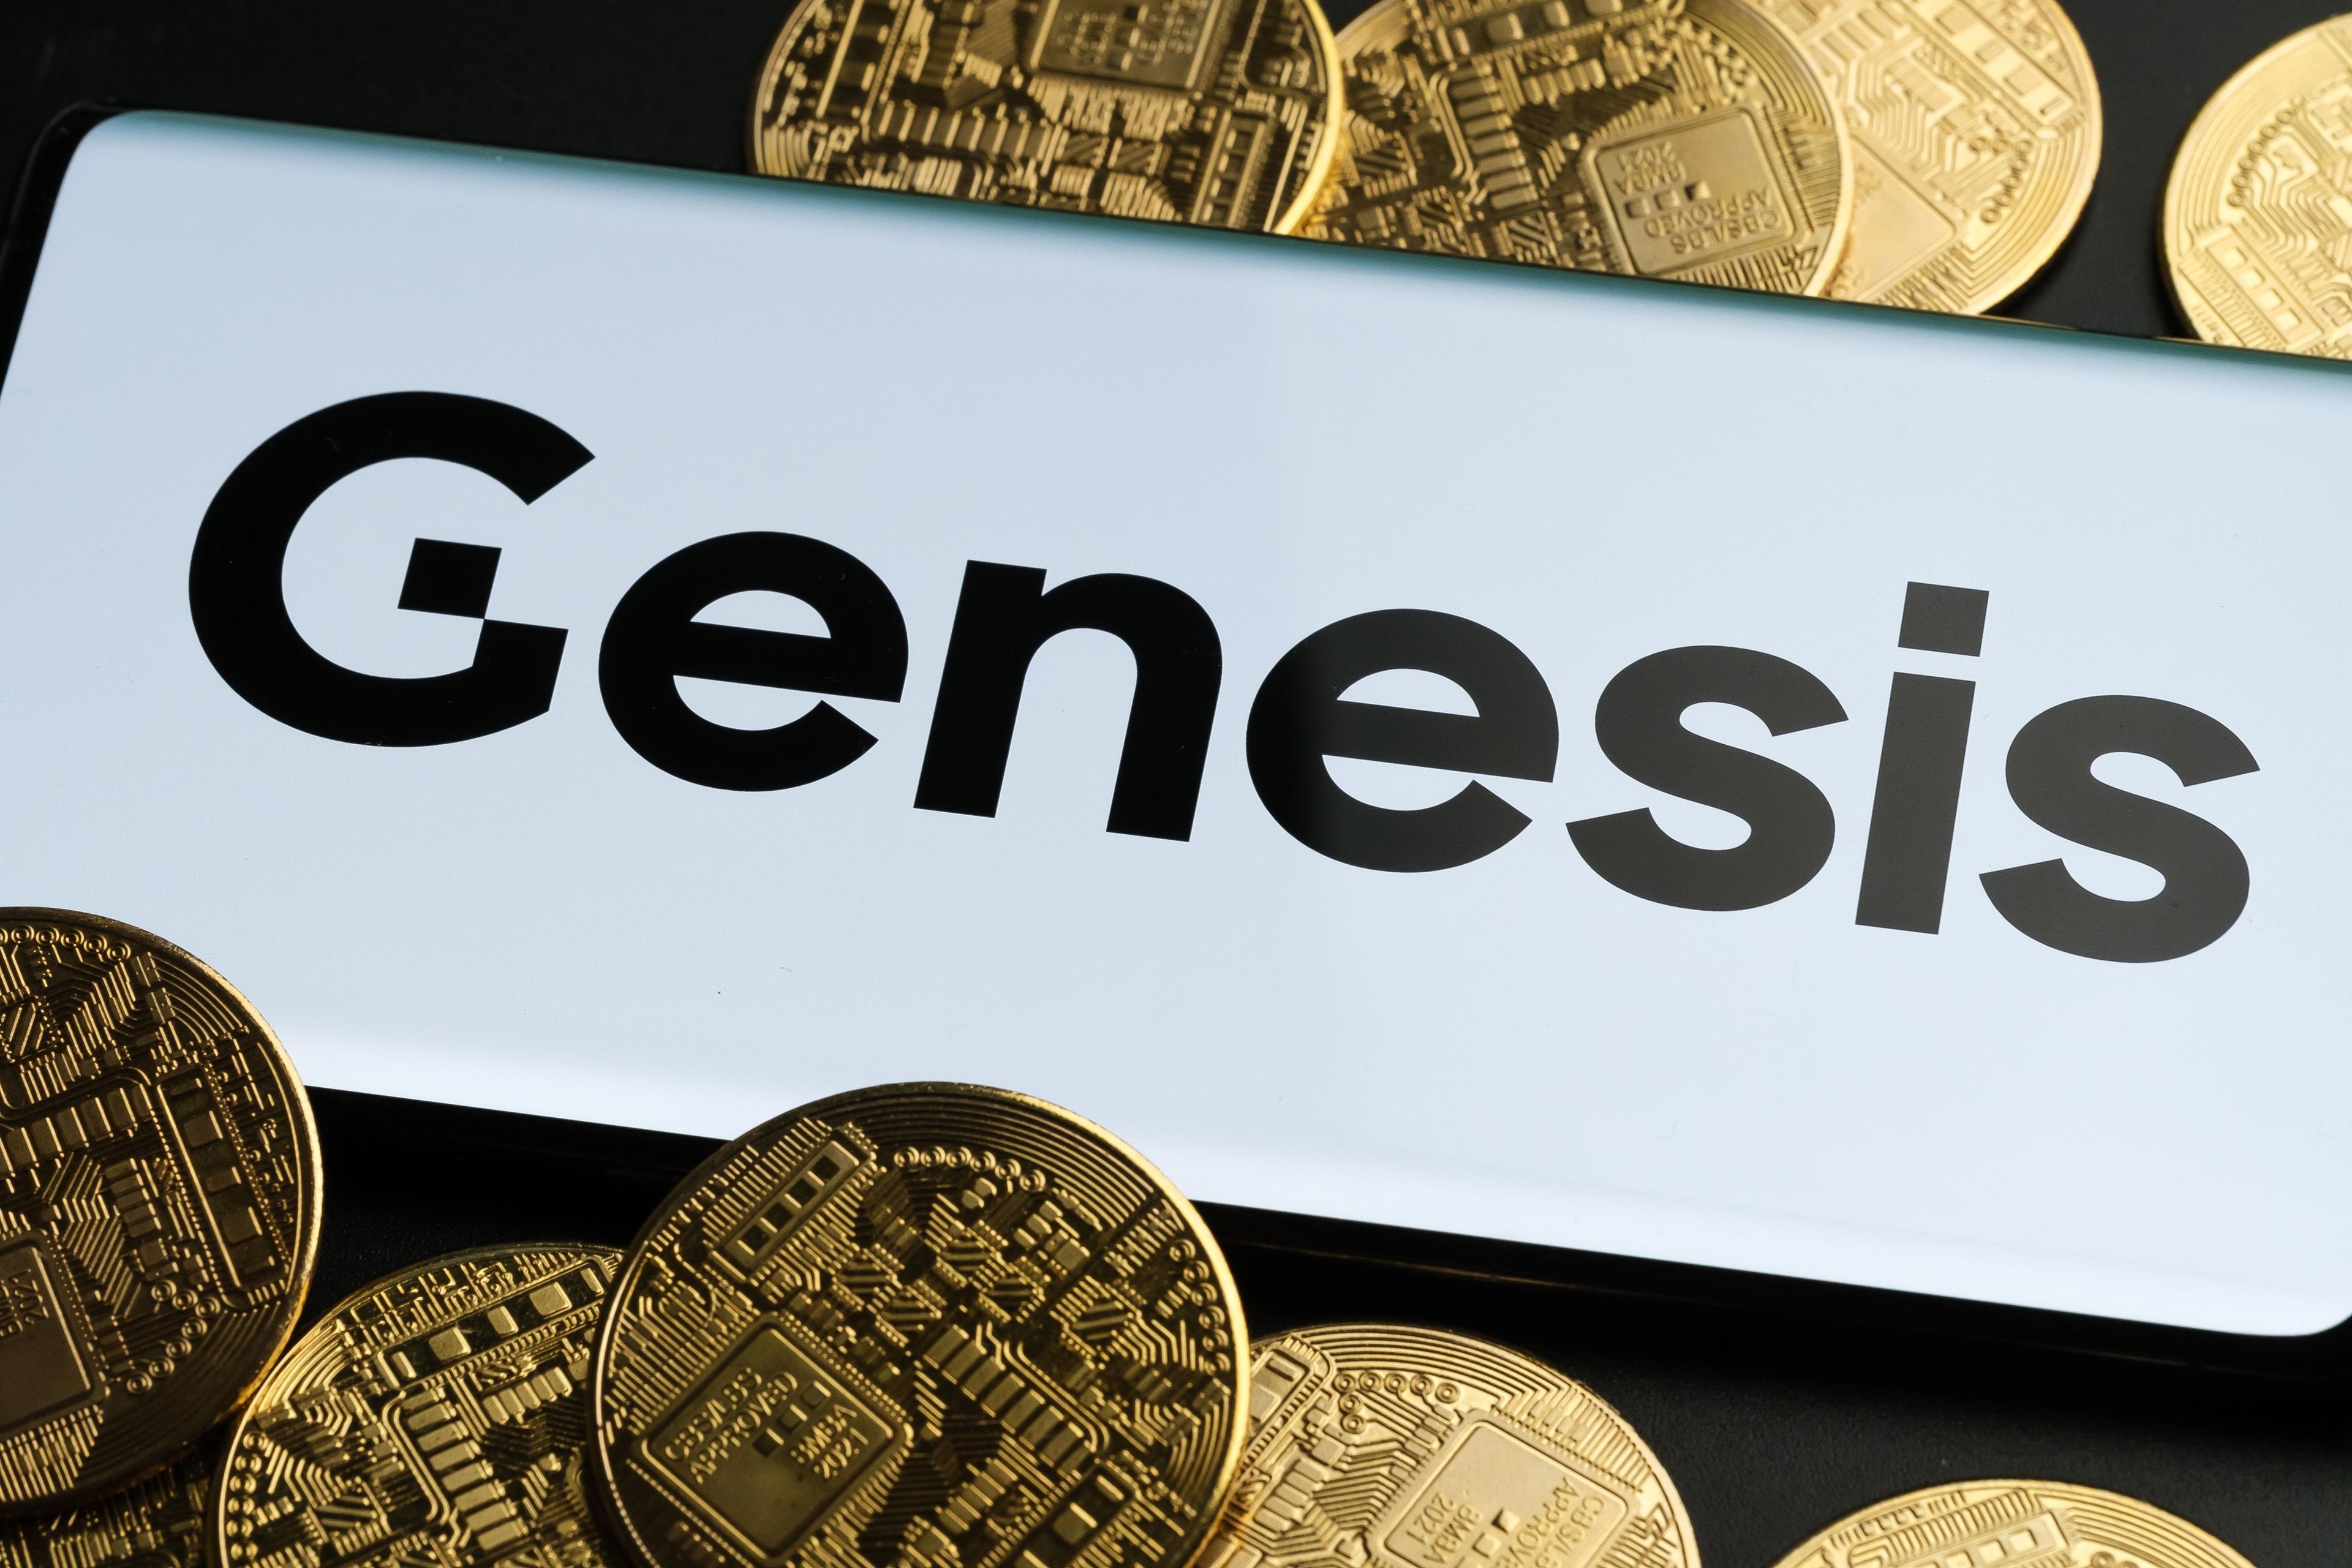 Digital Currency Group: A Look at Genesis & On-chain Activity